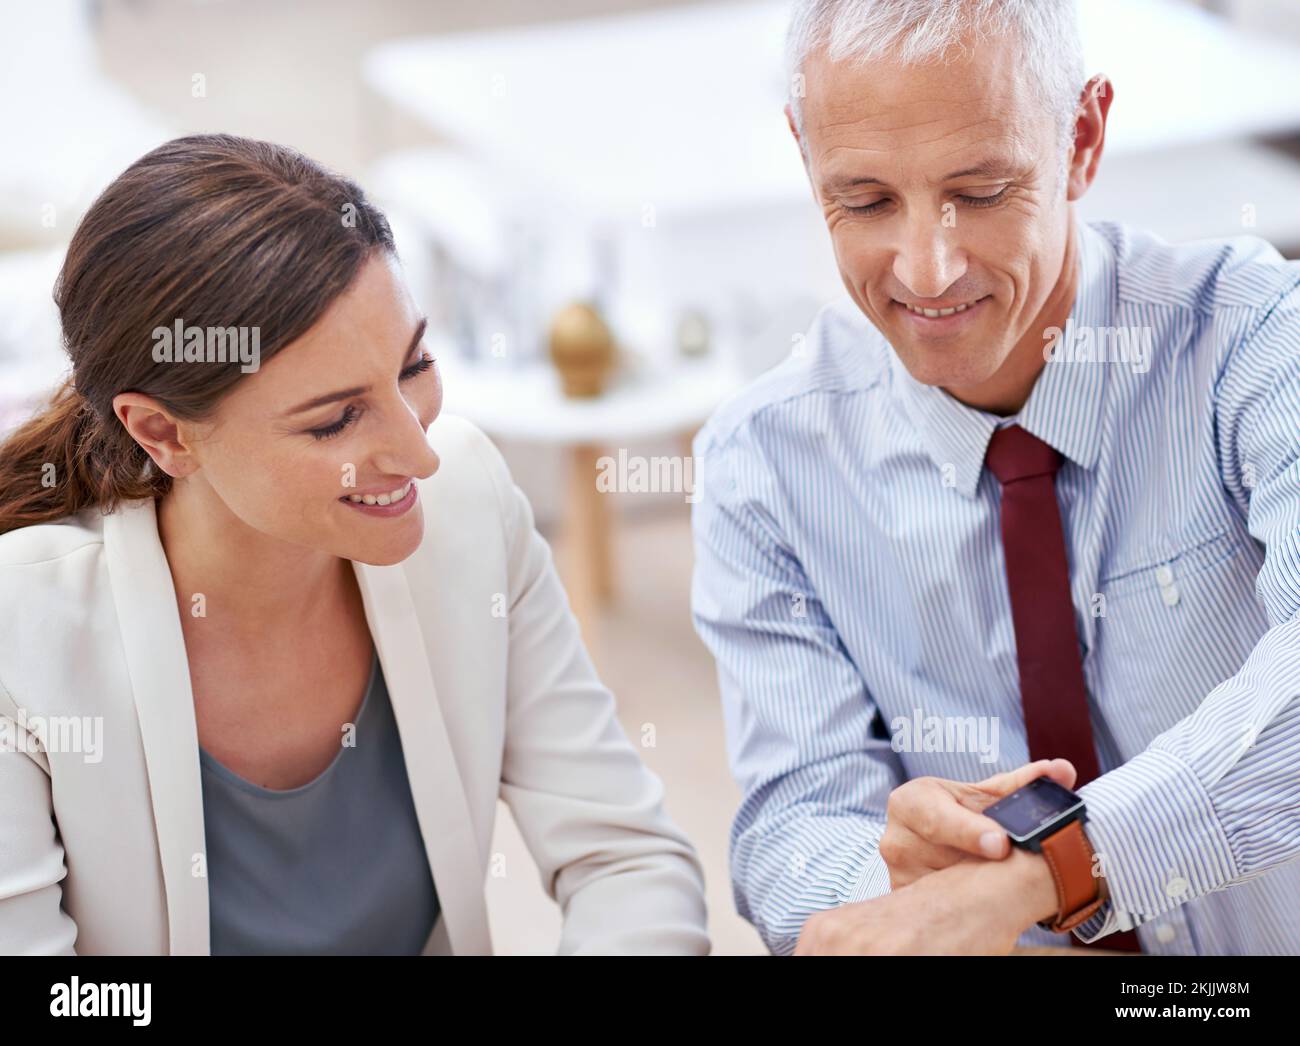 The latest technology... on my wrist. a businessman showing off his new watch to a coworker in the office. Stock Photo